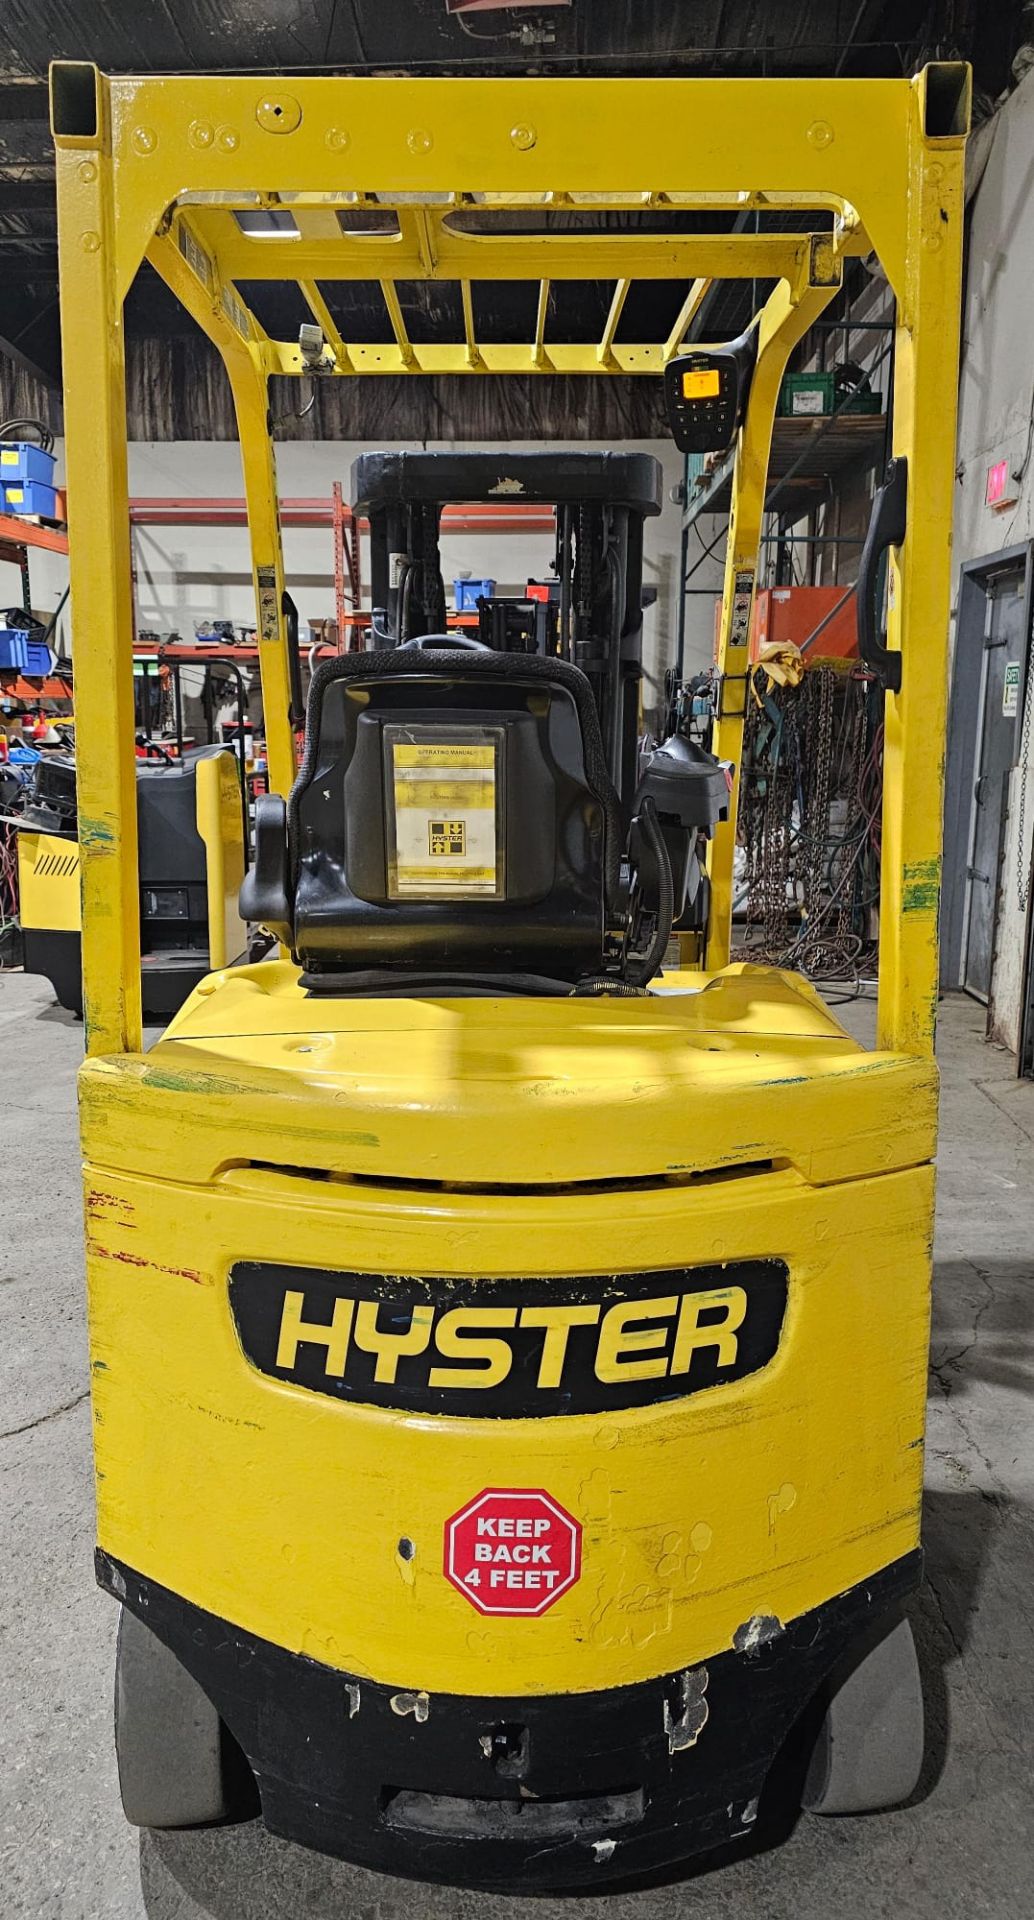 2014 Hyster 4,500lbs Capacity Forklift Electric 48V with sideshift & 4 functions & 3-STAGE MAST 189" - Image 5 of 6